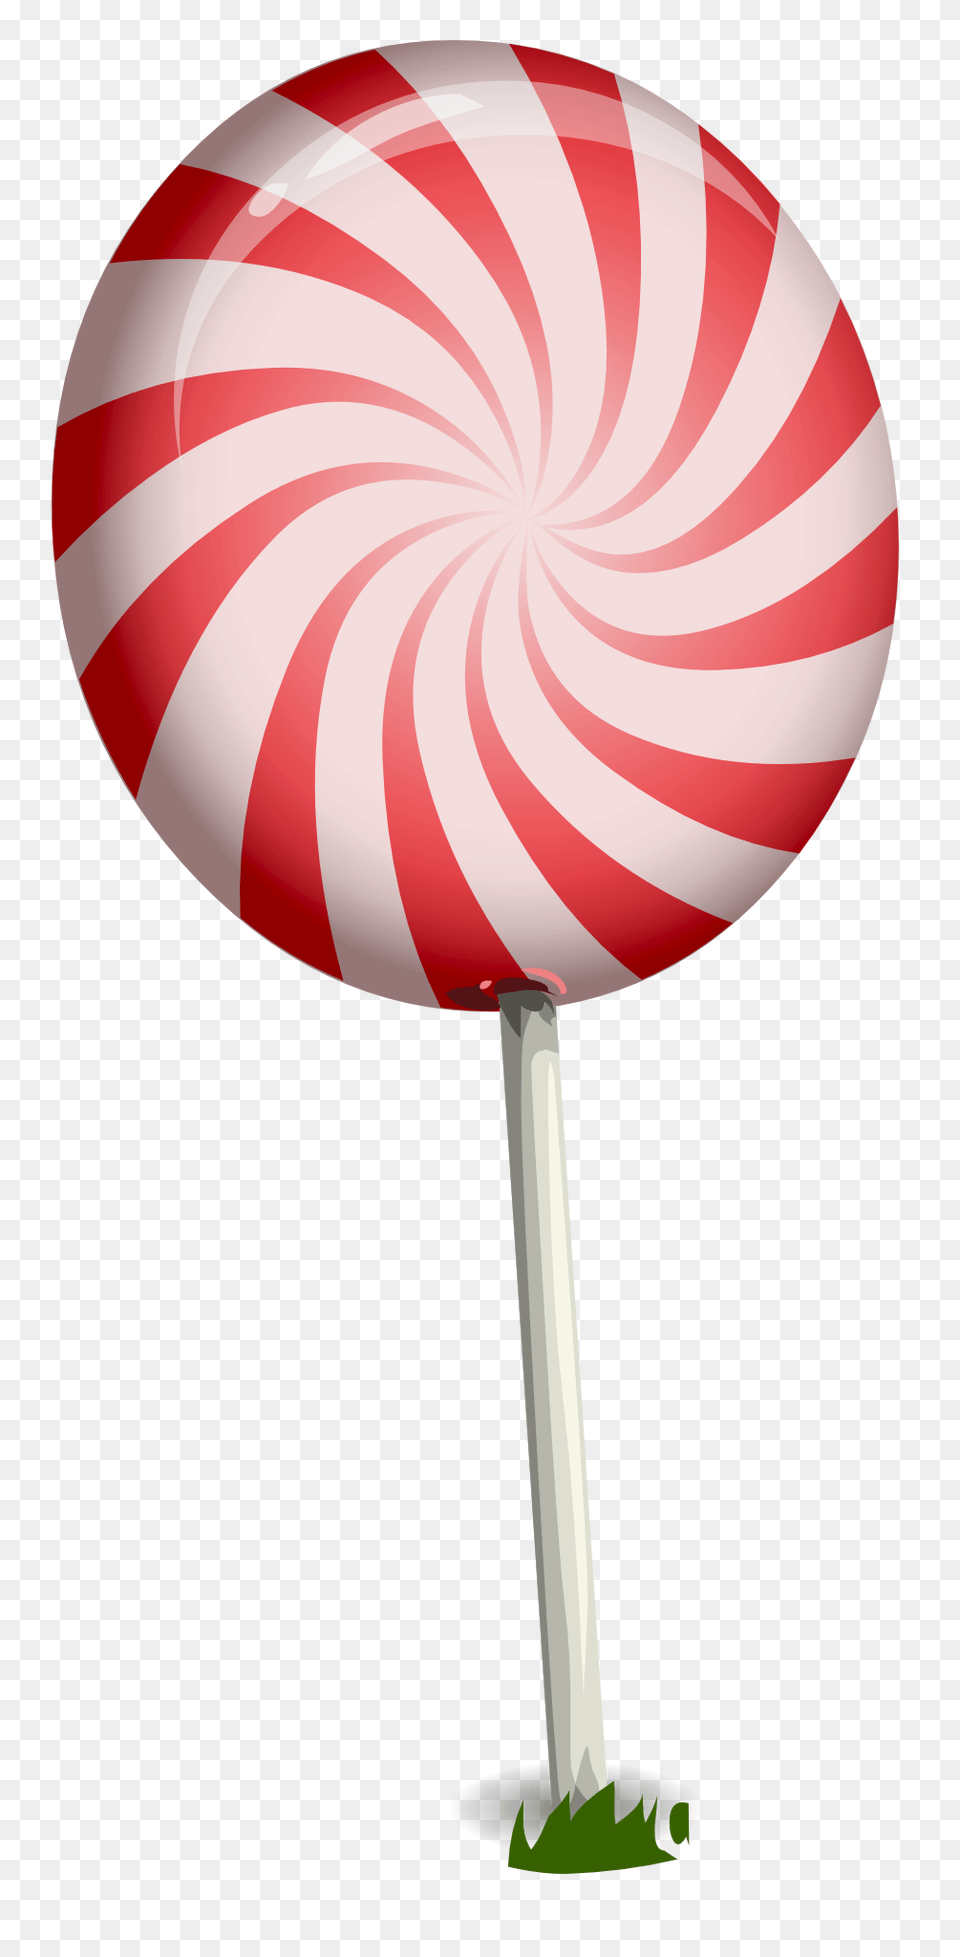 Candy Transparent Images Candy, Food, Sweets, Lollipop, Appliance Png